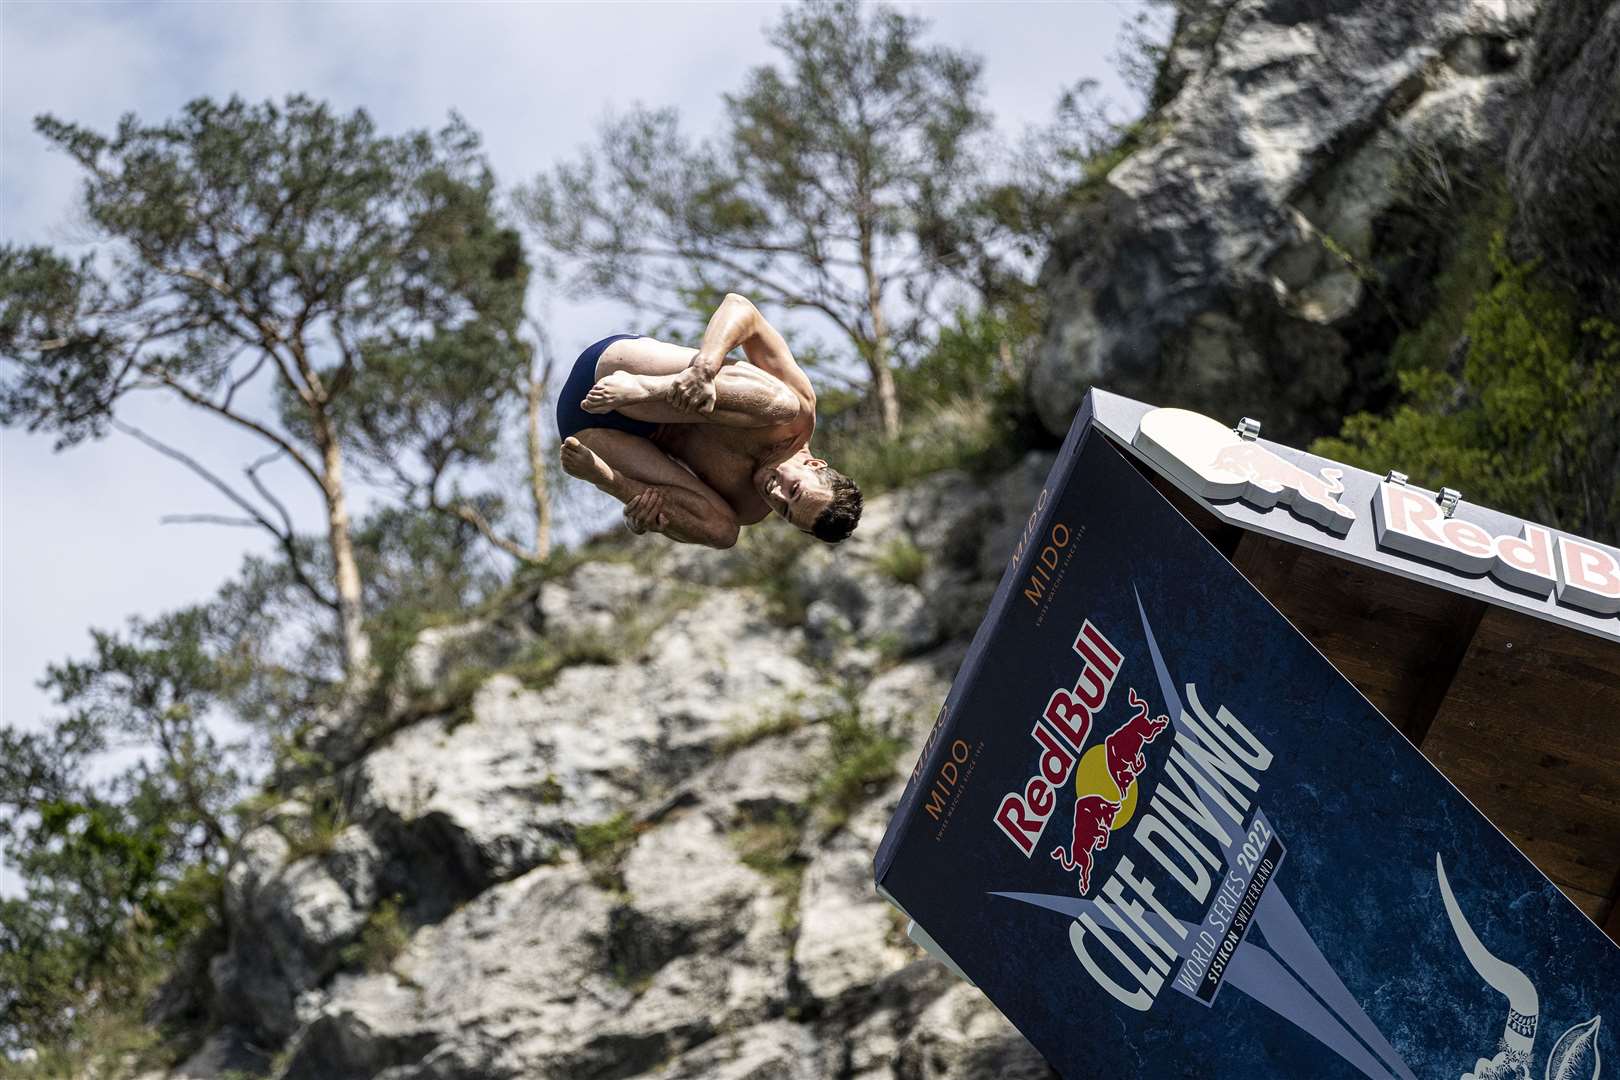 Aidan Heslop won first place over the weekend at an event in Sisikon, Switzerland (Romina Amato/Red Bull/PA)